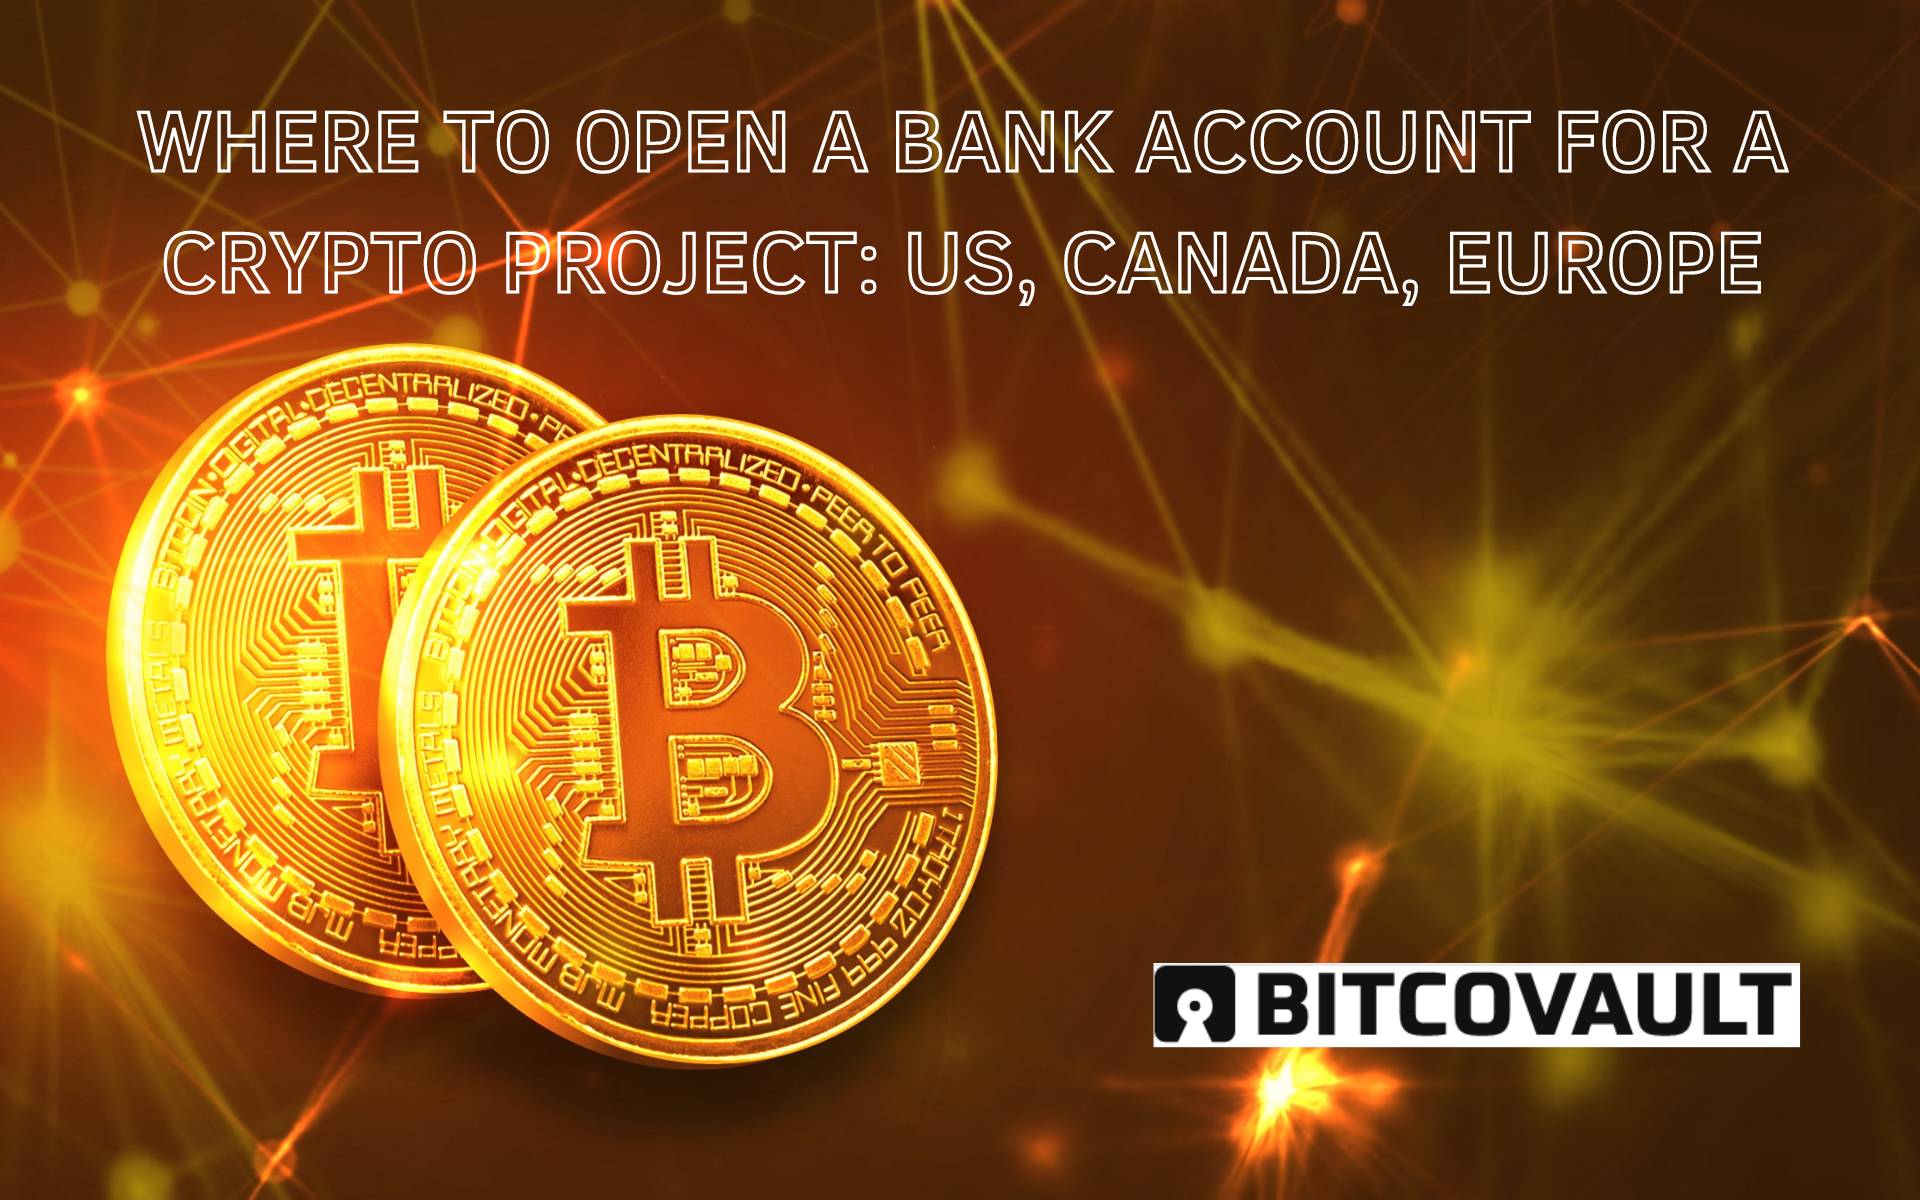 How to open an account for cryptocurrency business - the best banks in the US, Canada and Europe